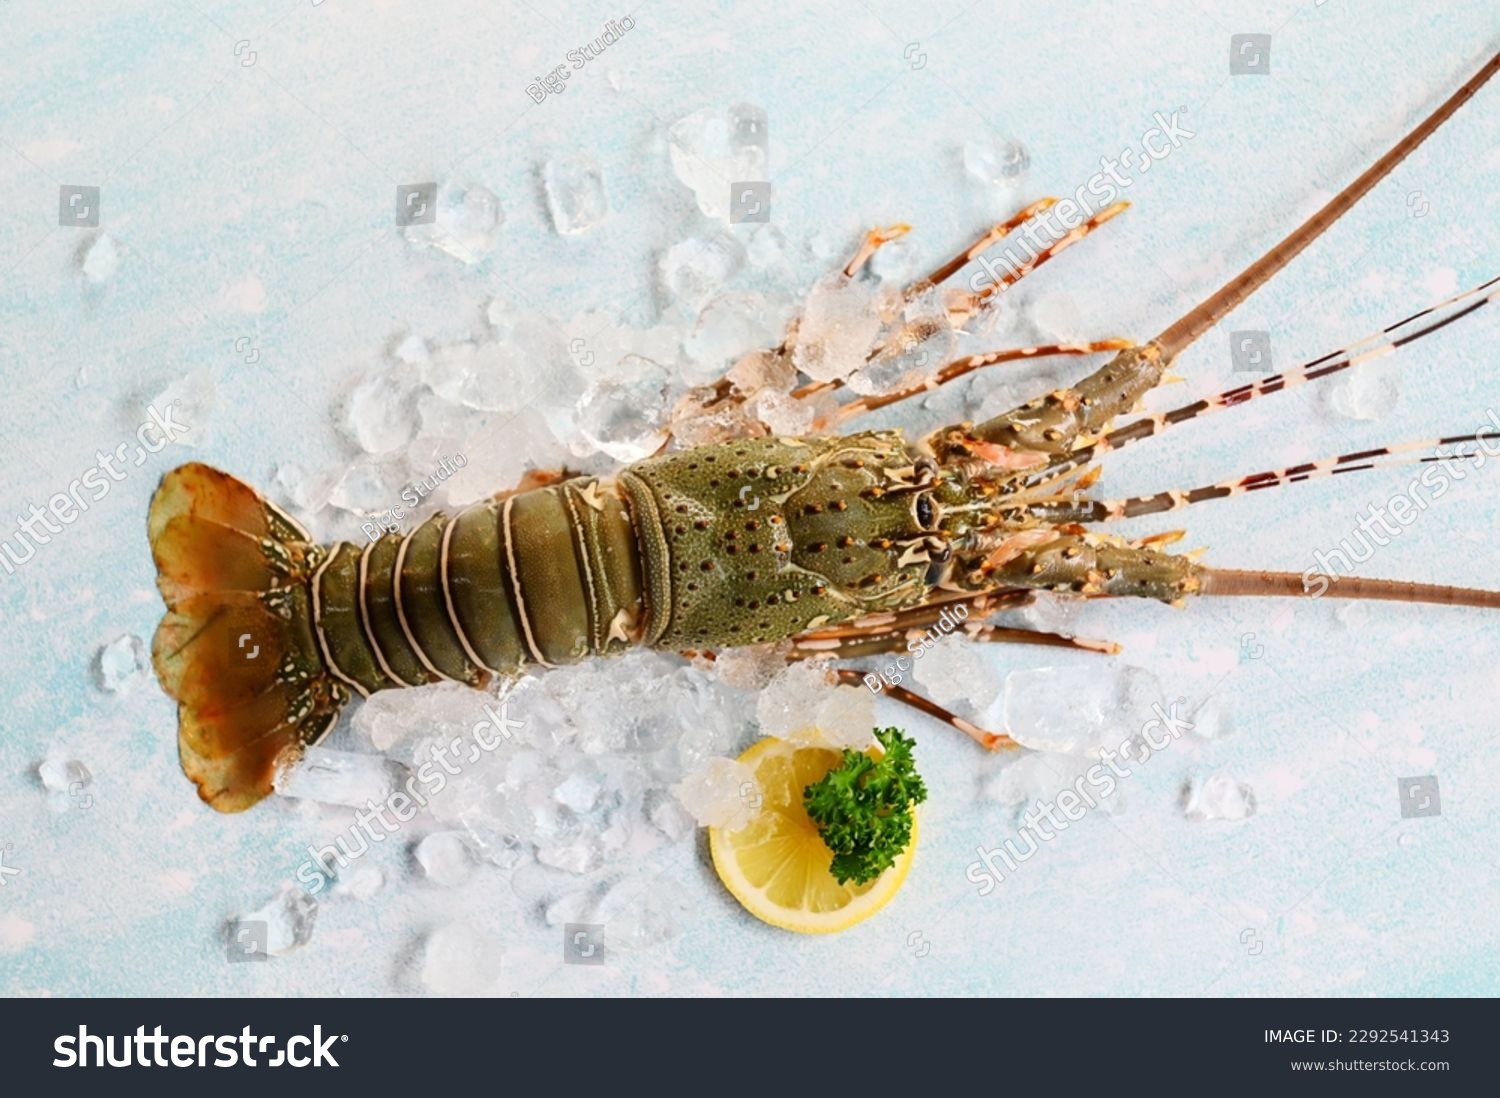 spiny lobster seafood on ice, fresh lobster or rock lobster with herb and spices lemon coriander parsley on background, raw spiny lobster for cooking food or seafood market - top view #2292541343